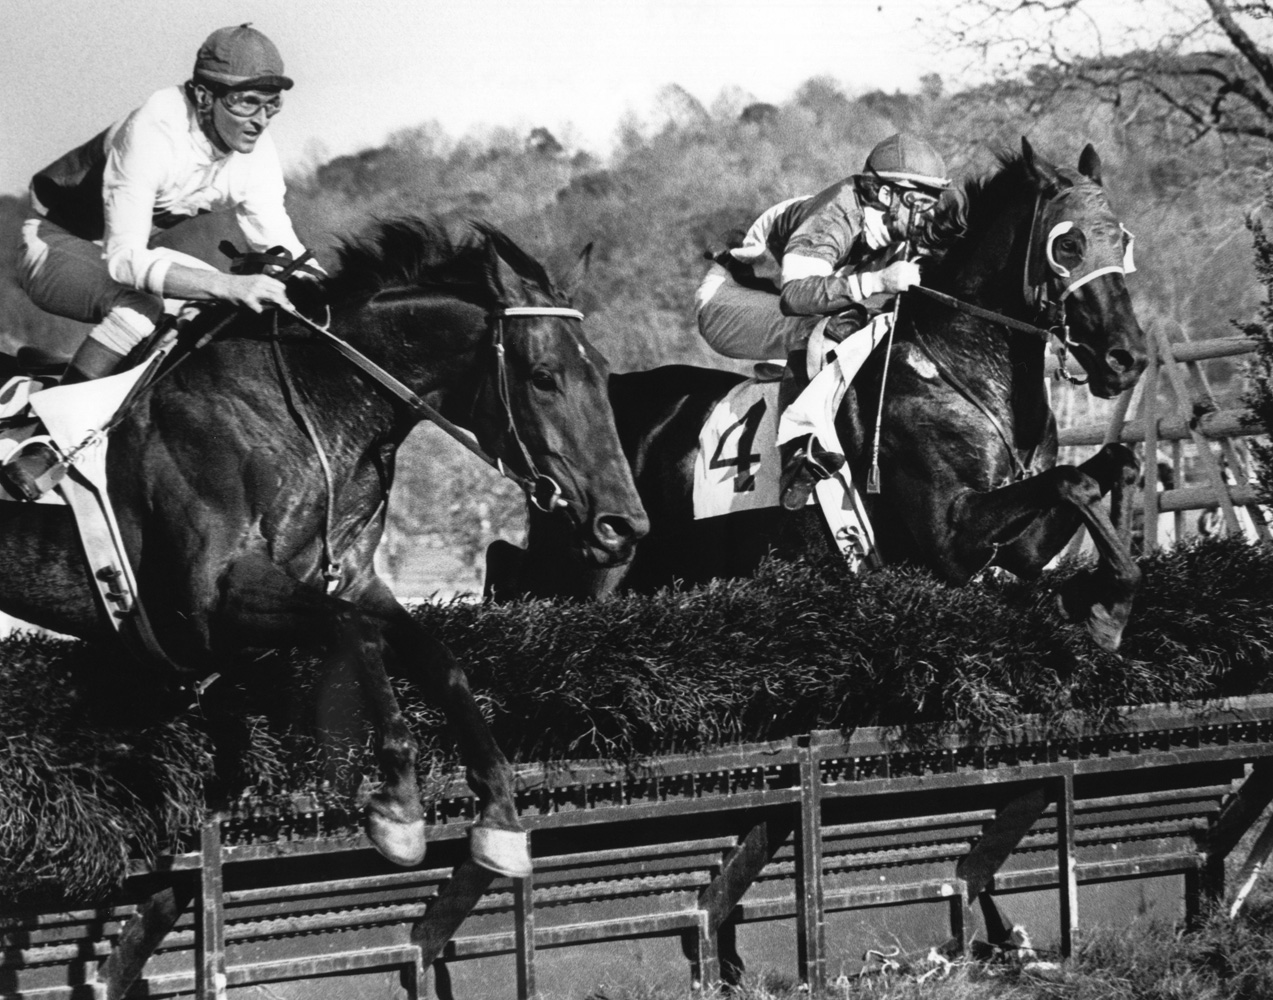 Café Prince with Jerry Fishback up (left) at the 1977 Samuel Martin Memorial Essex Hunt at Far Hills (Douglas Lees/Museum Collection)